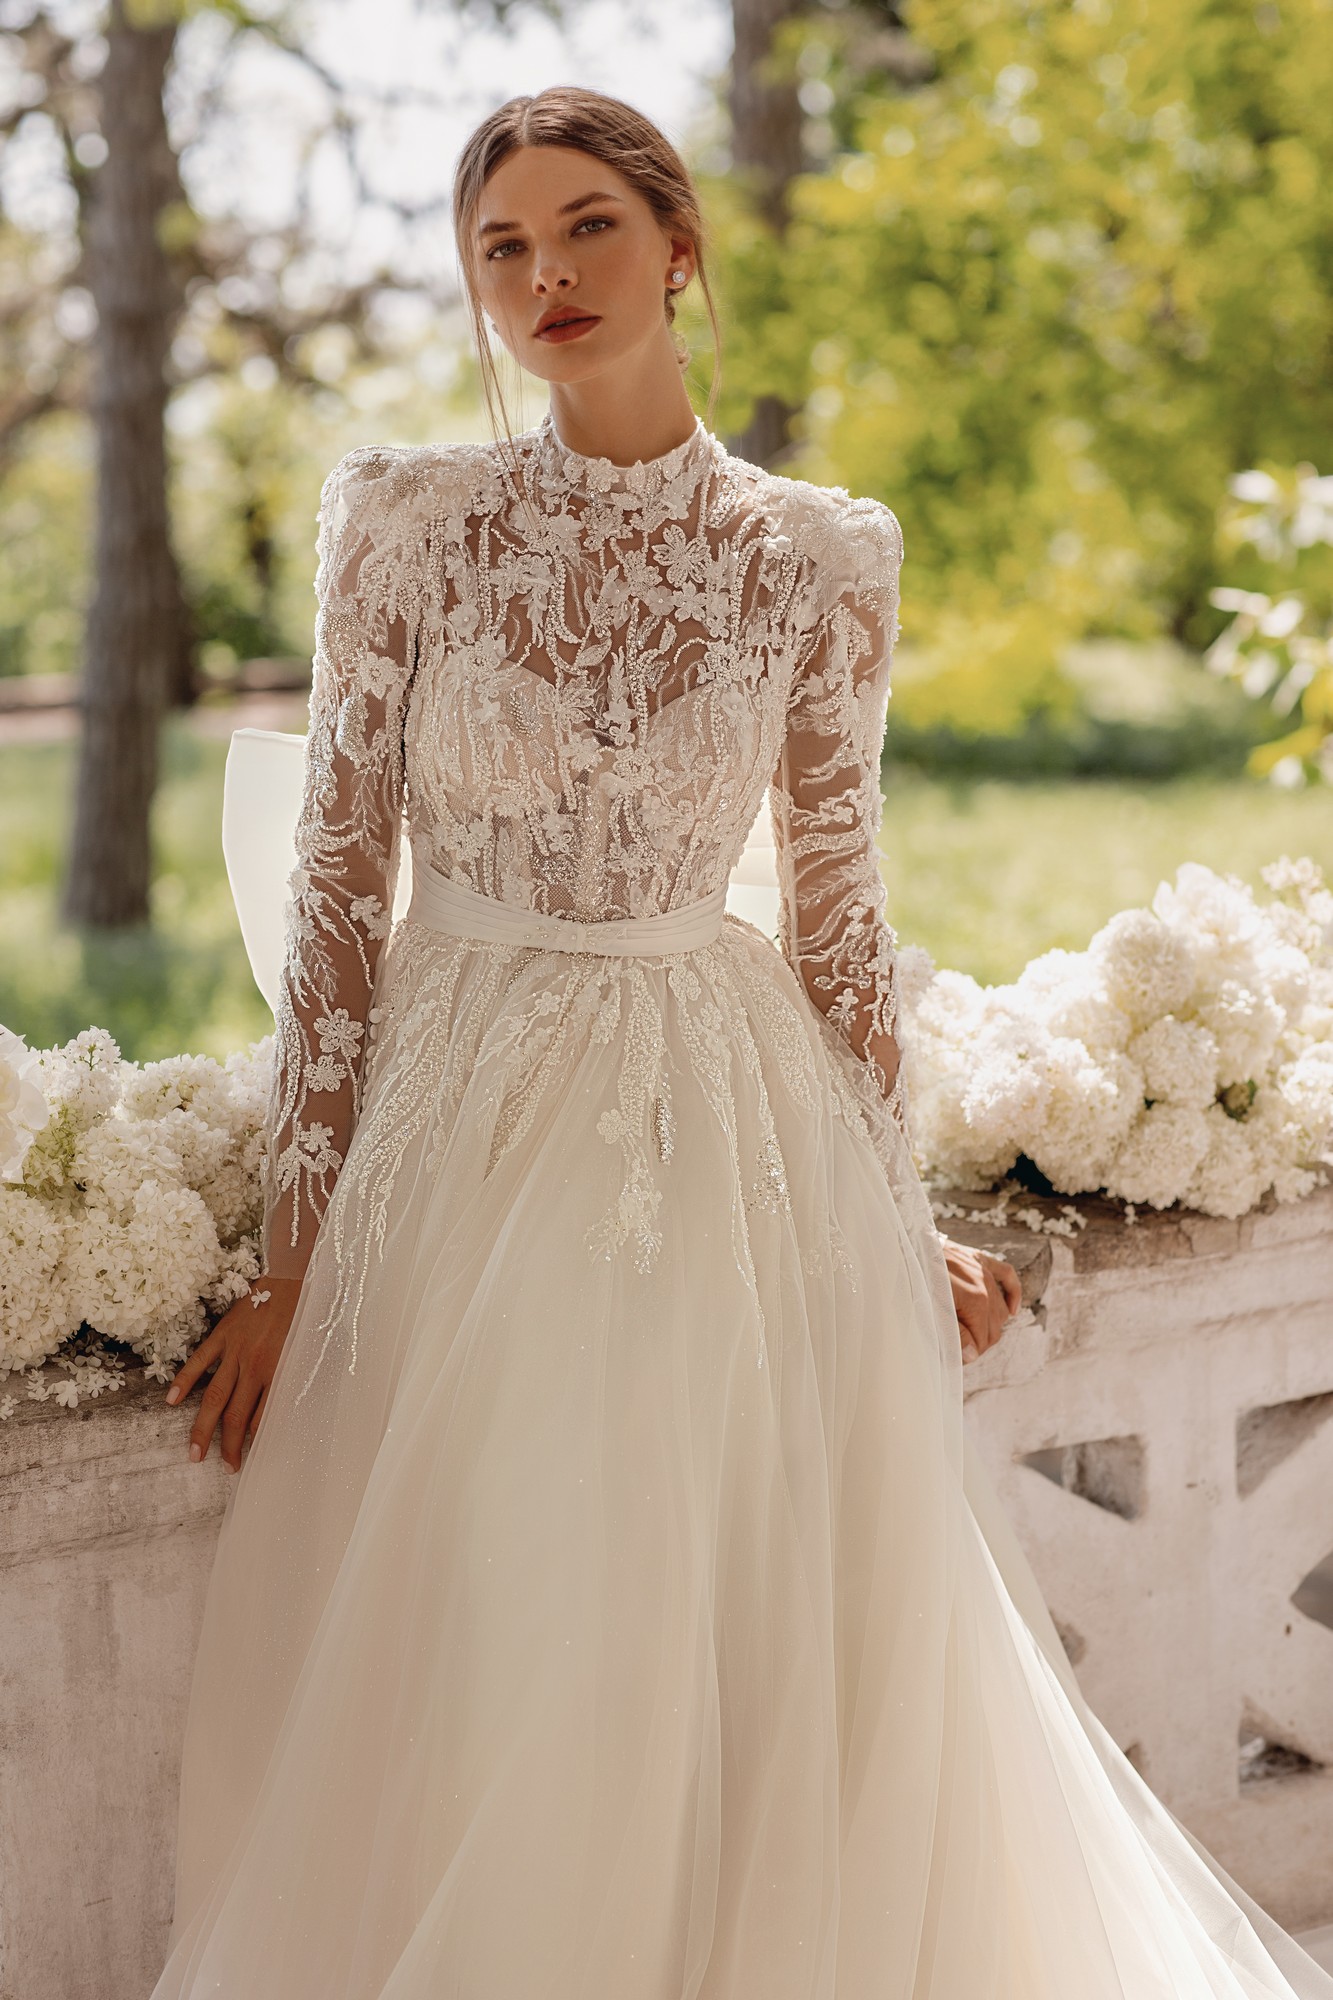 Wedding Dress Trends We Will See in 2022